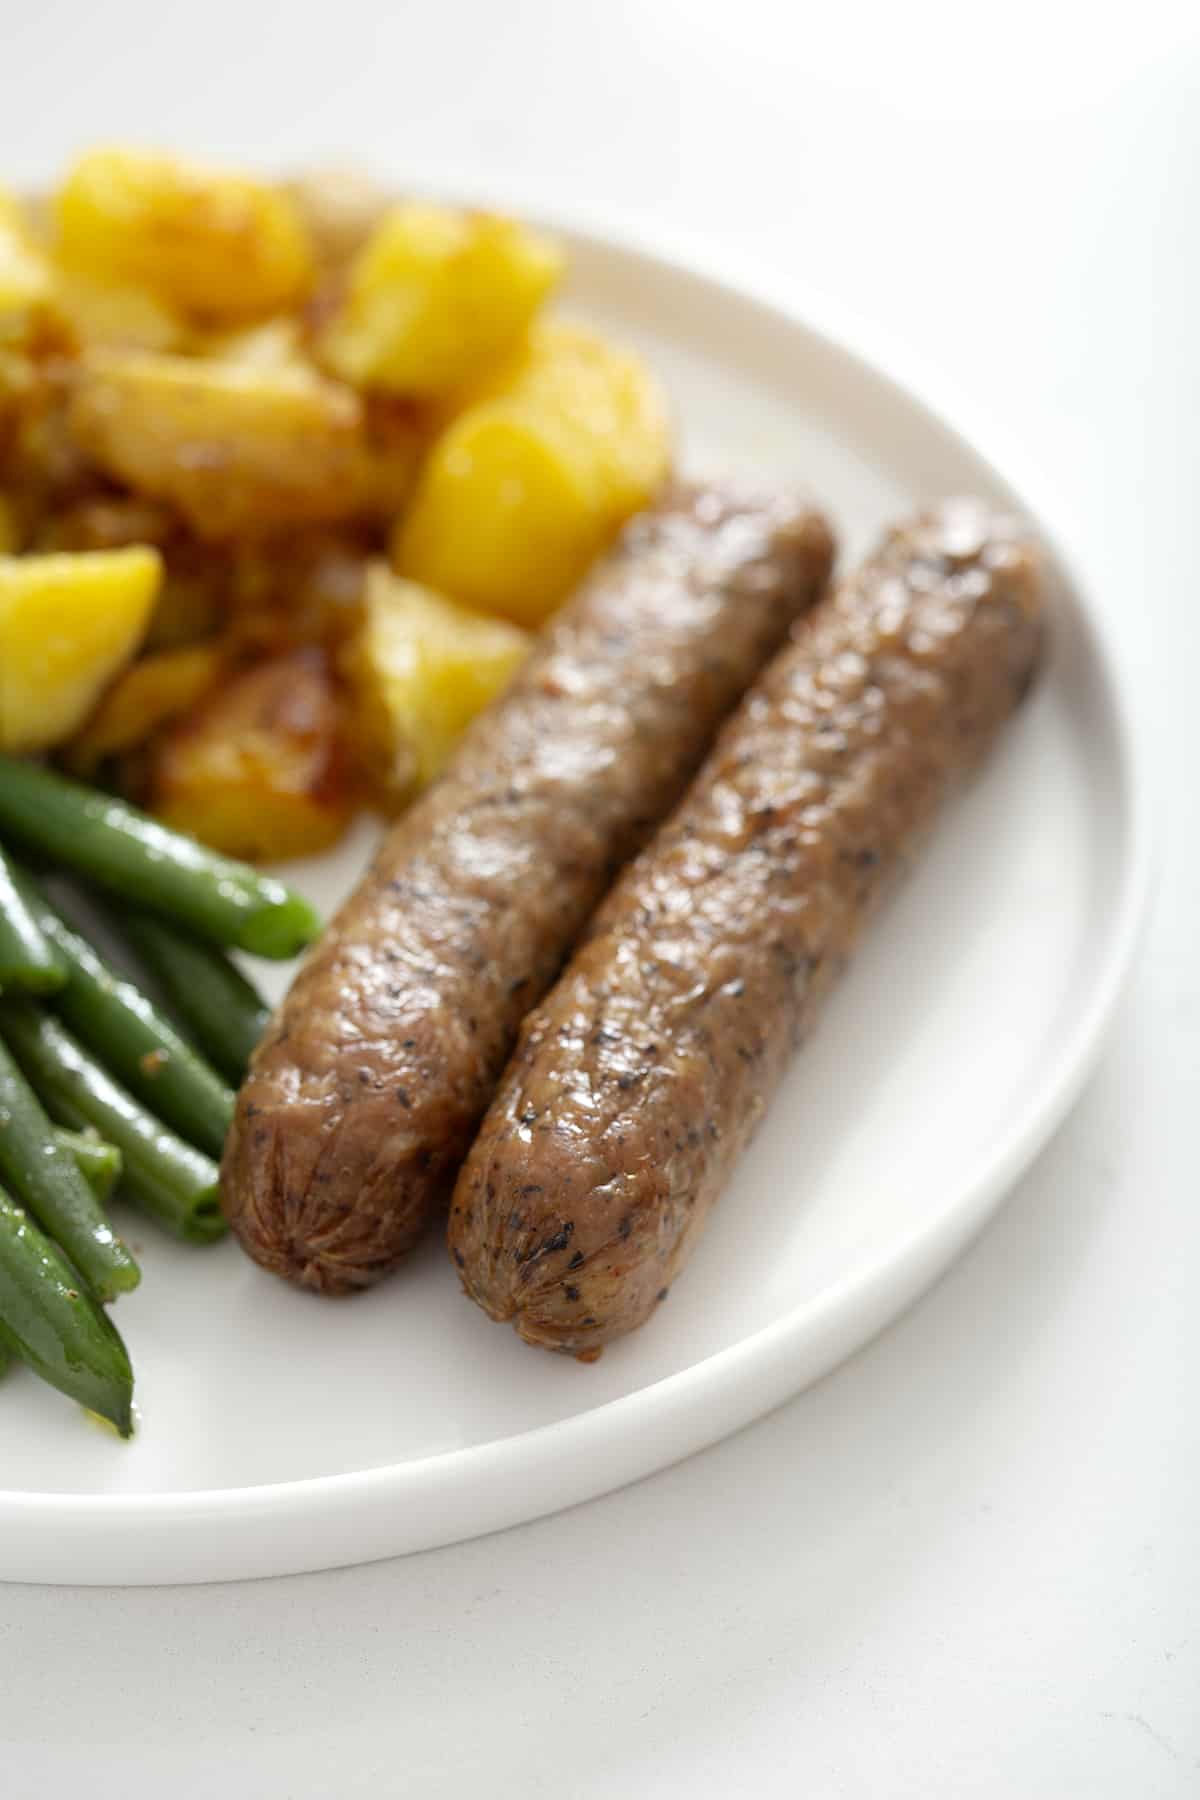 sir fryer chicken sausage on plate with potatoes and green beans